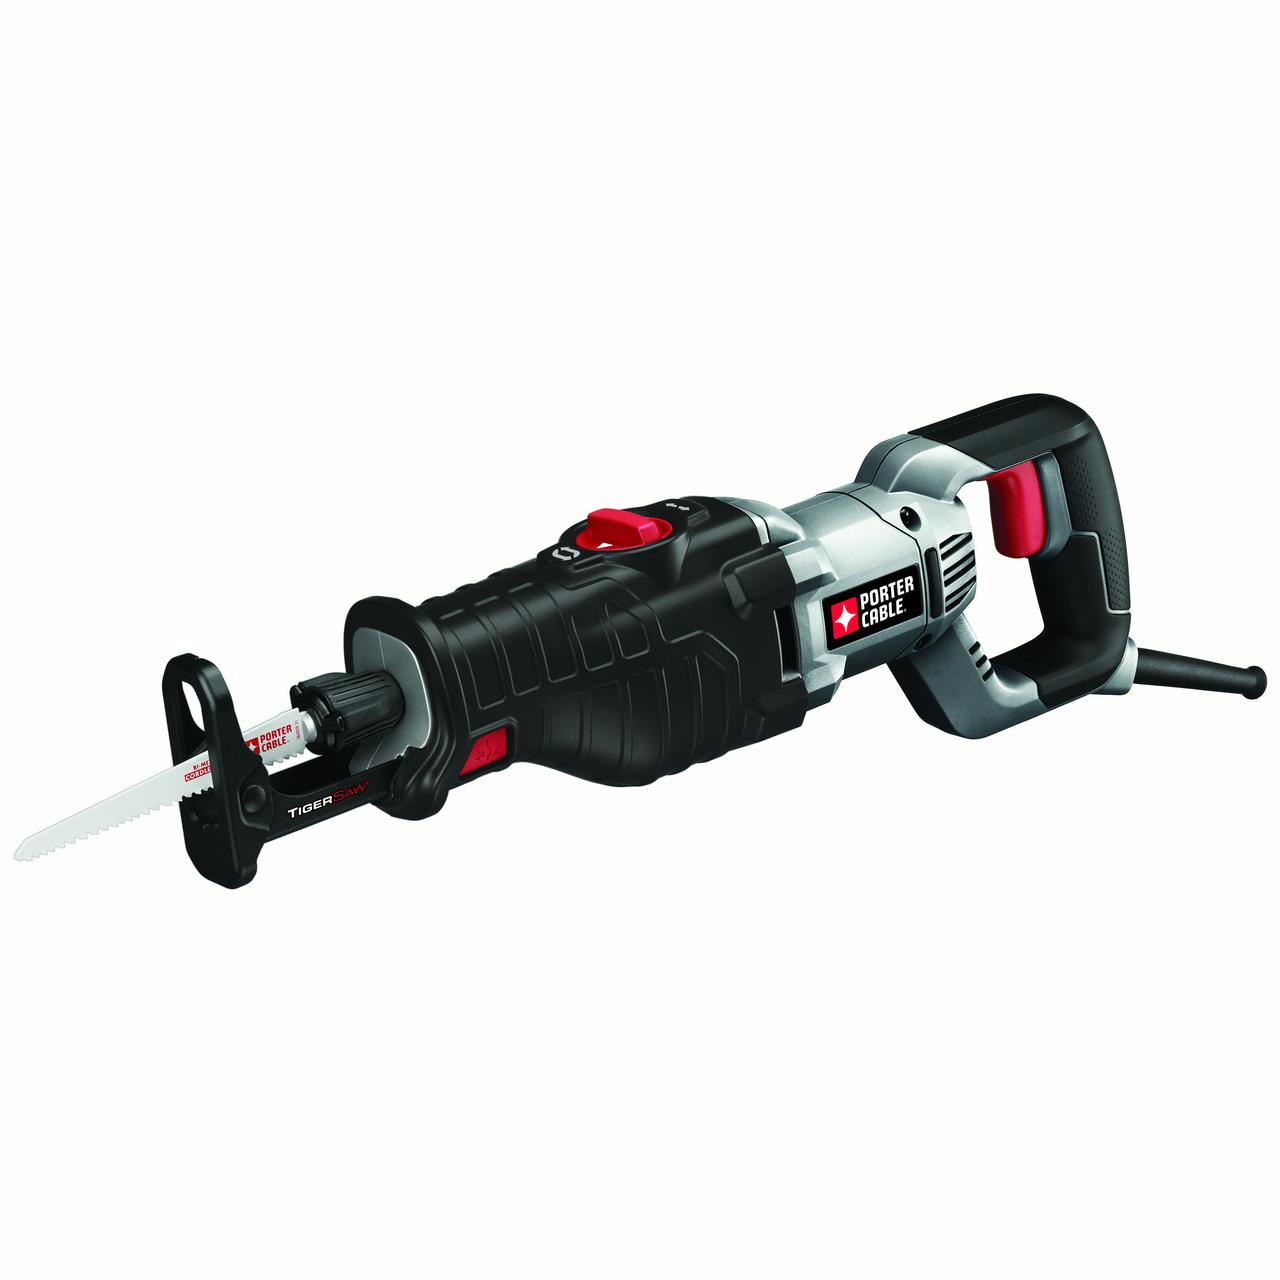 PORTER CABLE 8.5-Amp Orbital Reciprocating Saw, PC85TRSOK